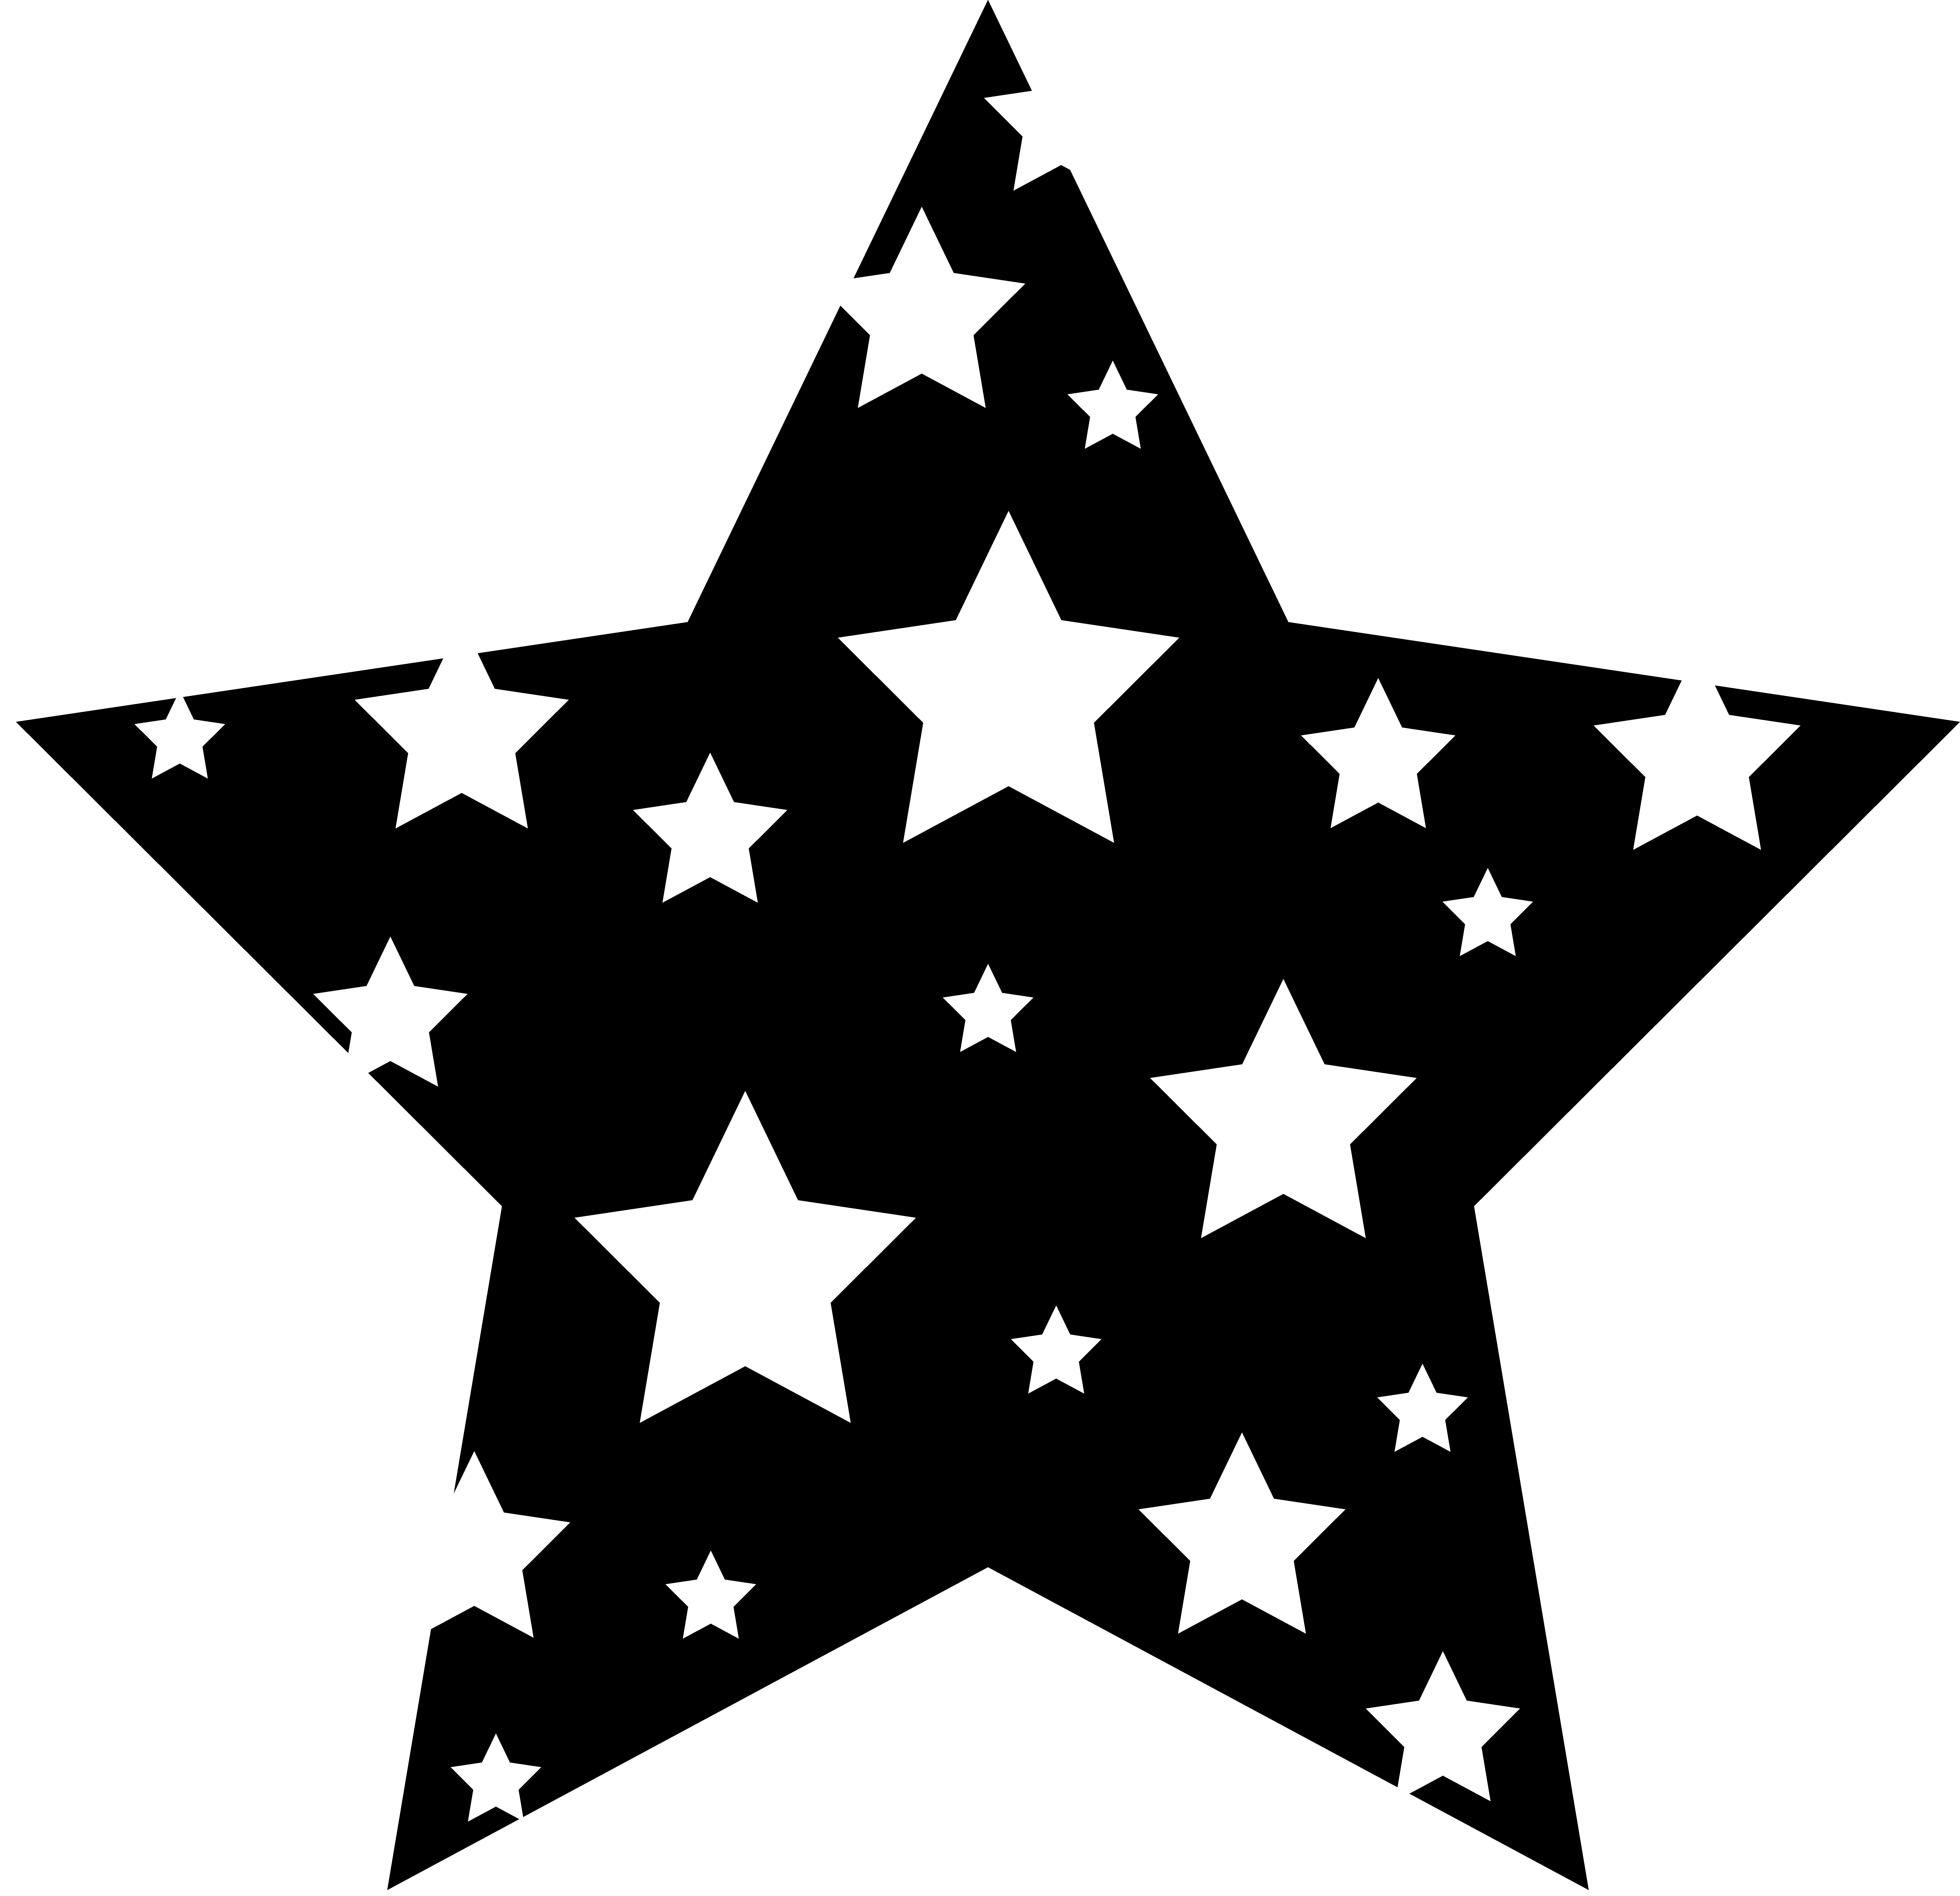 Star Clipart Black And White | Clipart library - Free Clipart Images